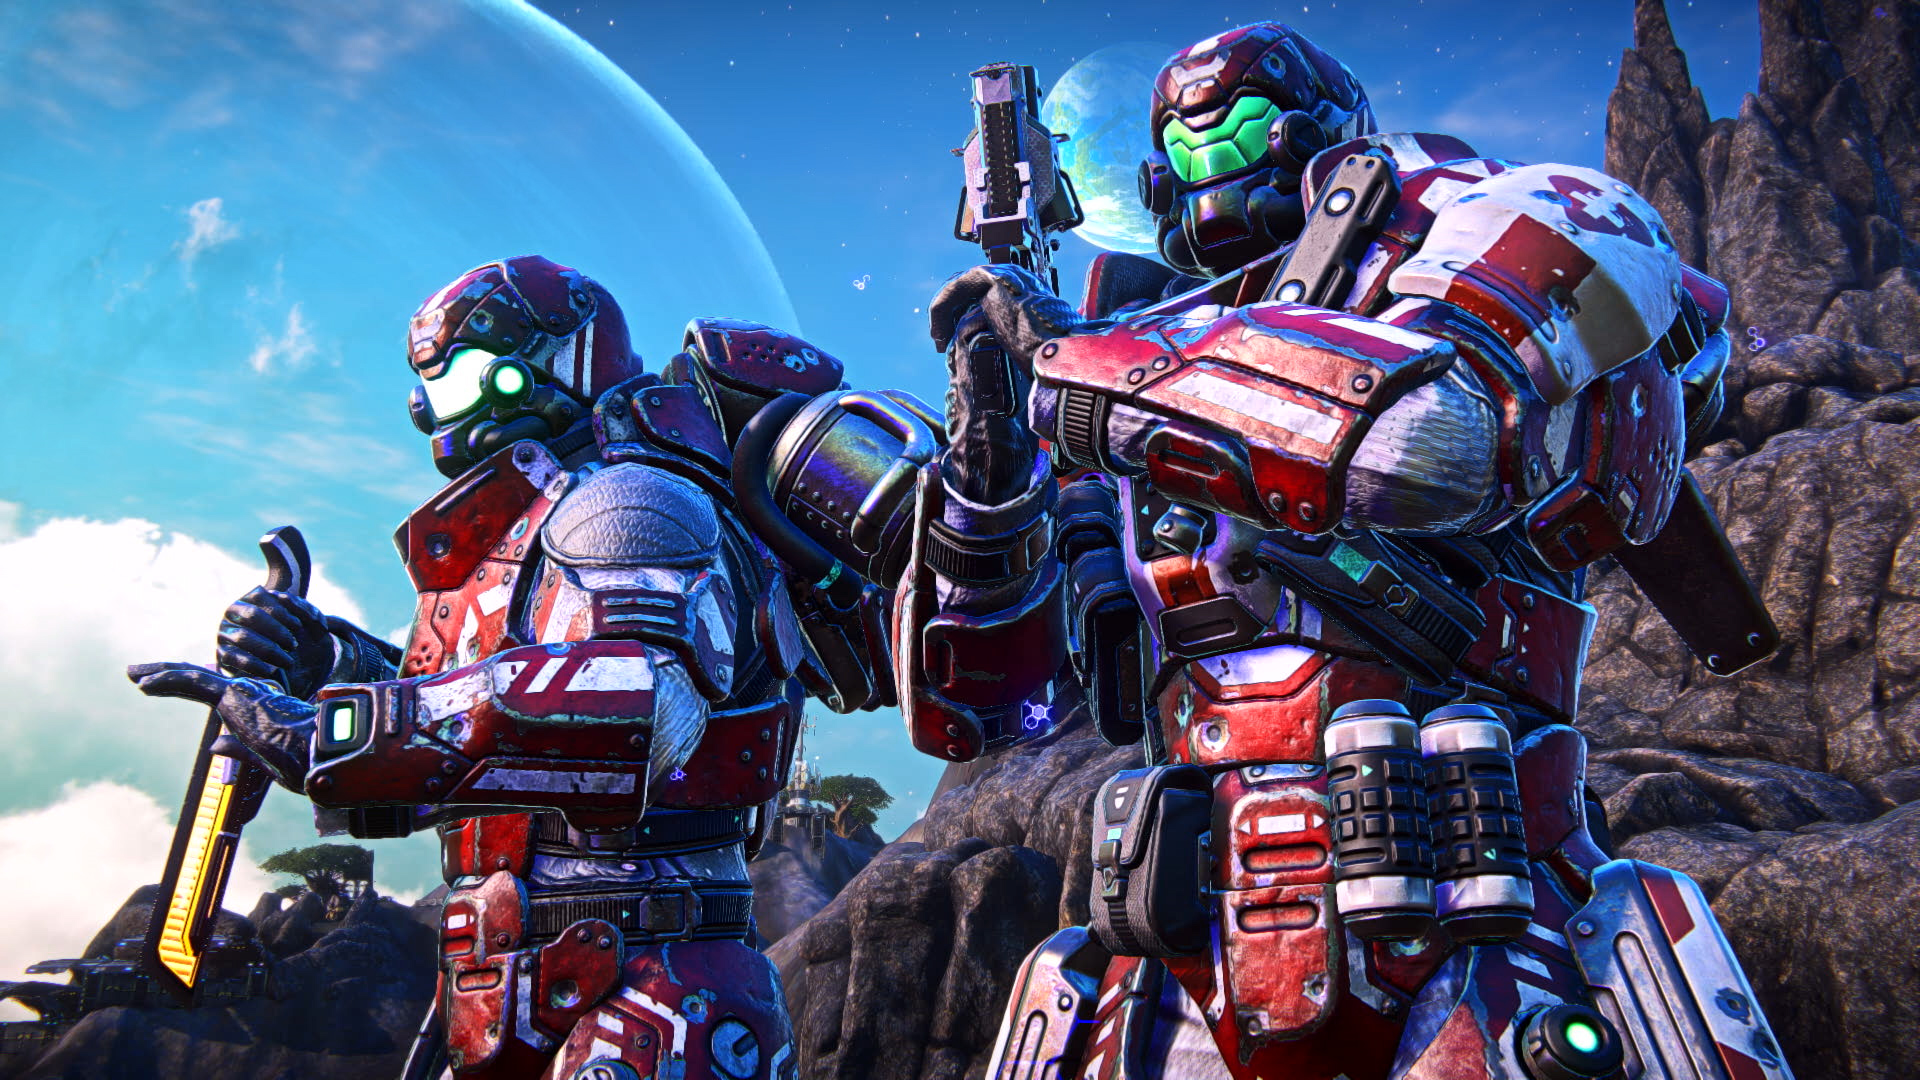 Enter To Win A Copy Of Planetside Arena With Closed Beta Access Pc - enter to win a copy of planetside arena with closed beta access pc gamer